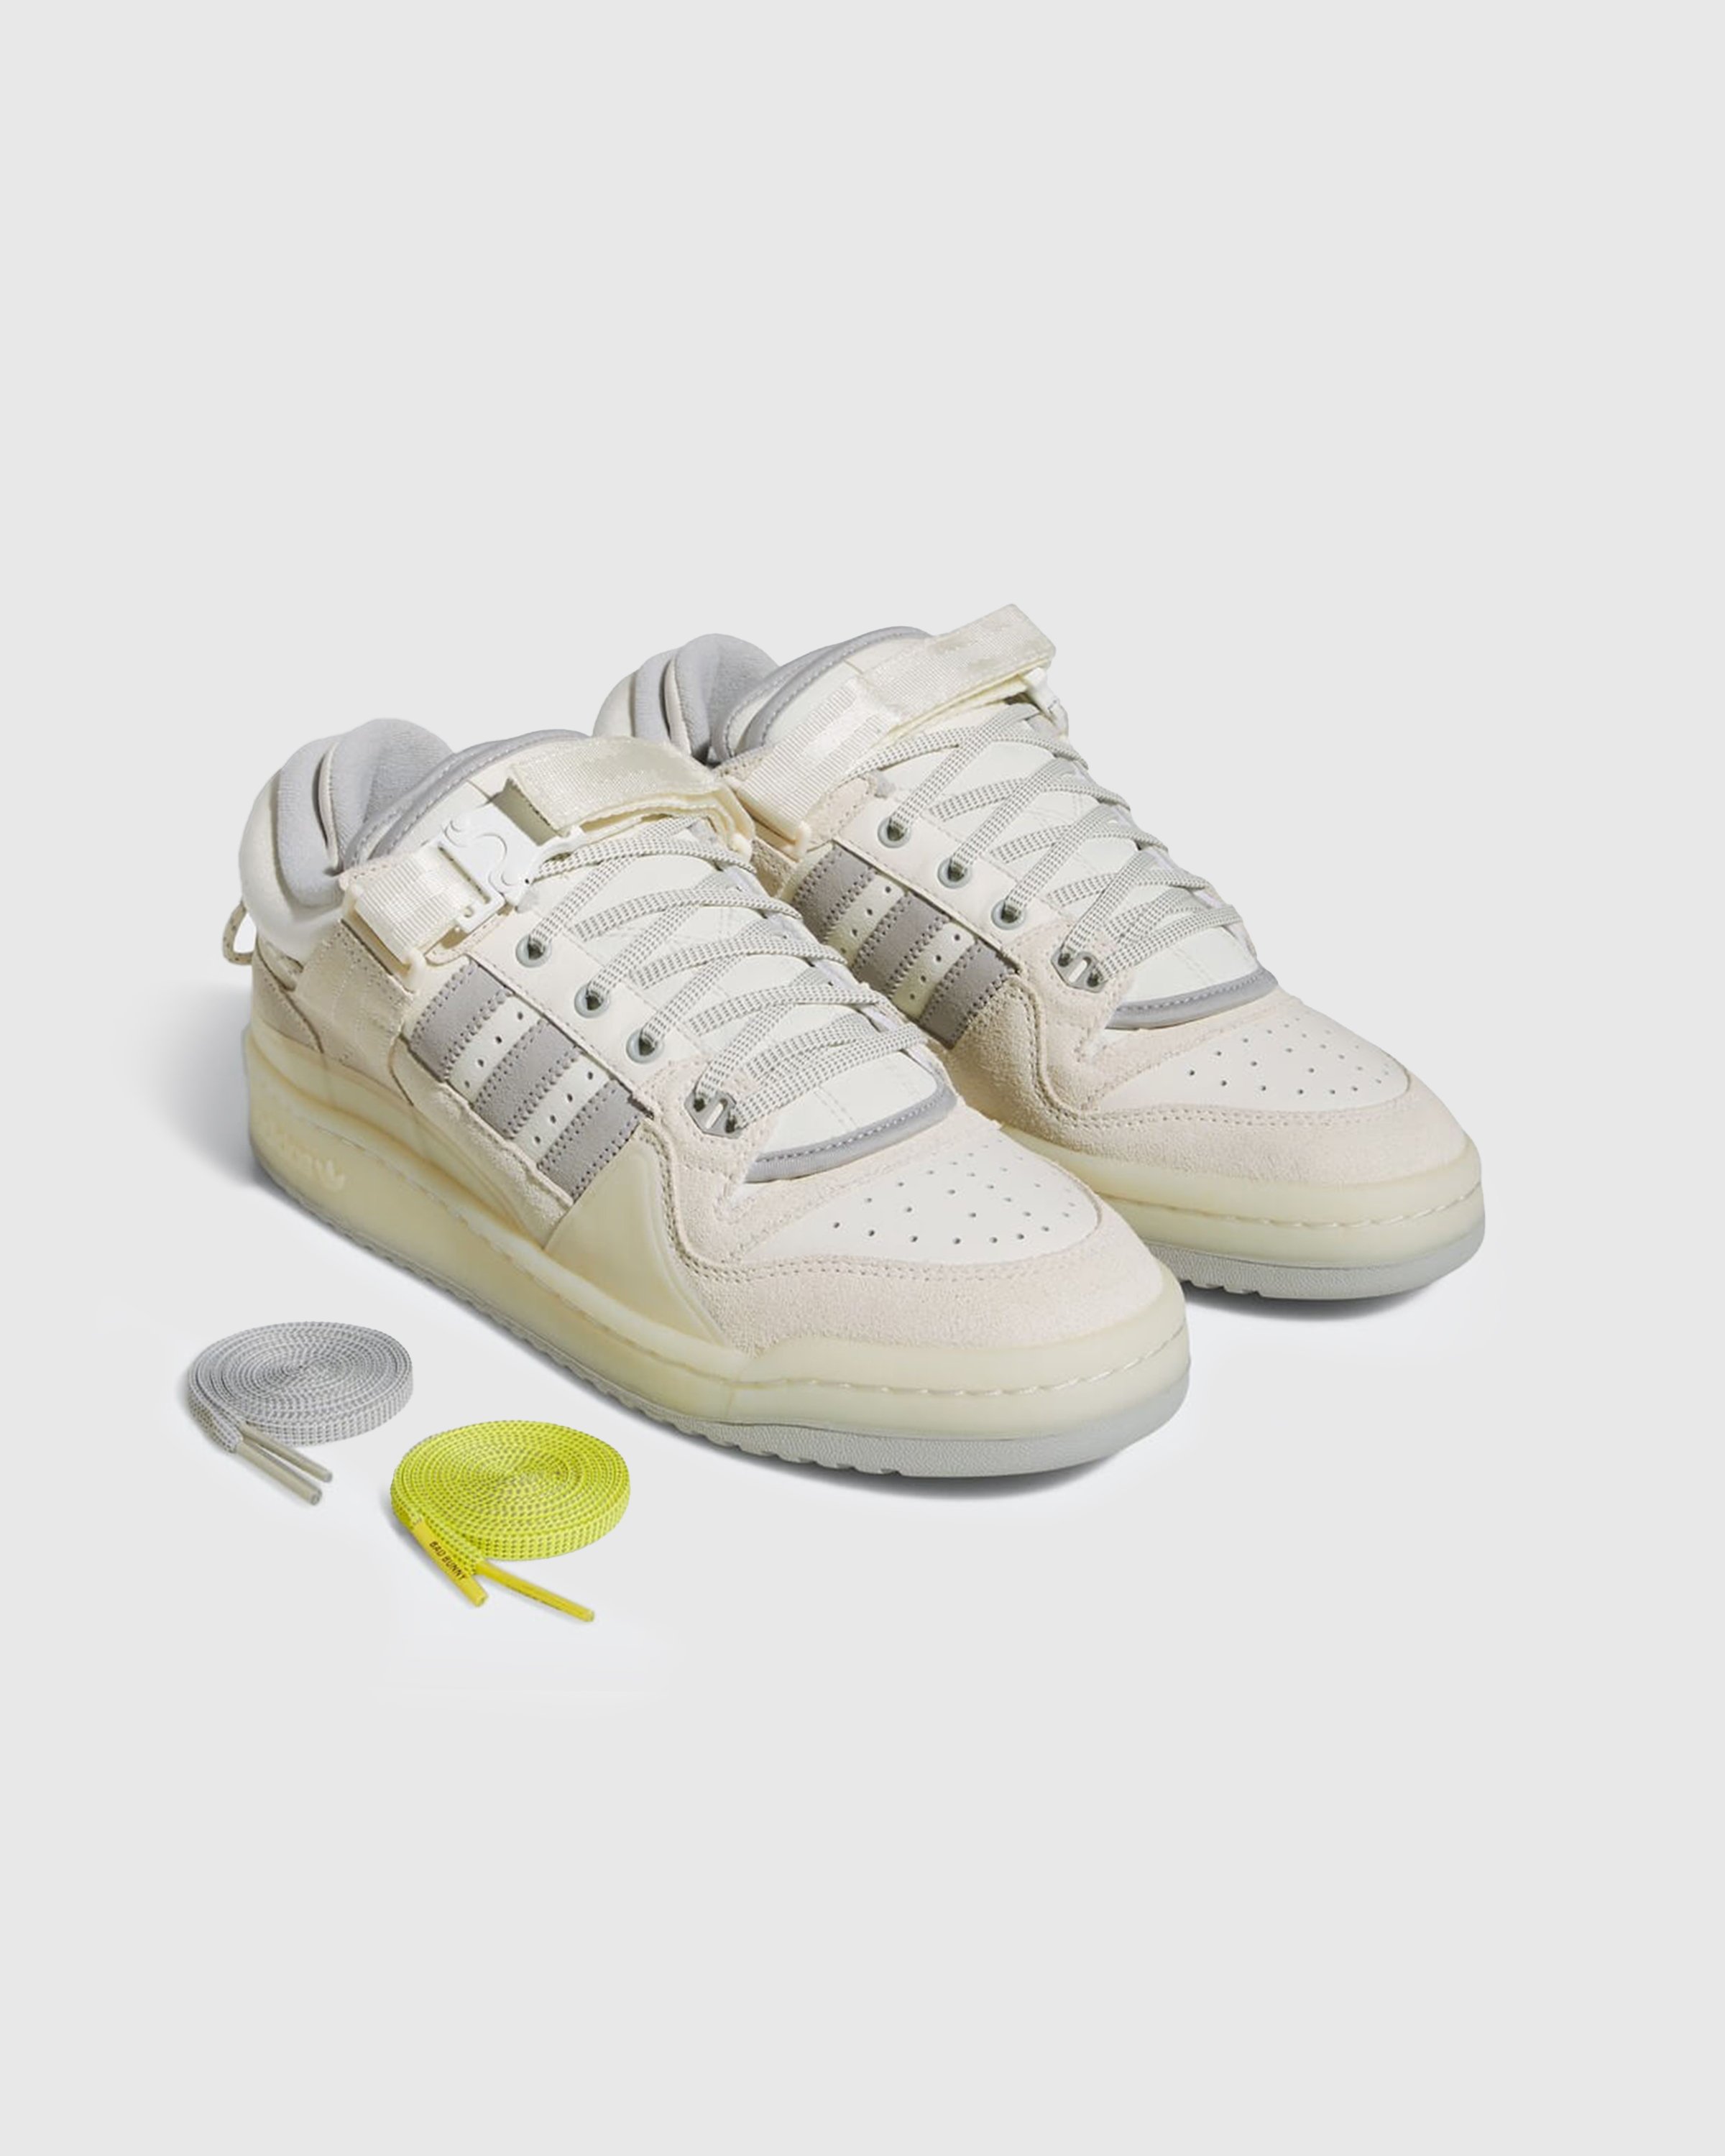 Adidas x Bad Bunny - Forum Low Cloud White/Clear Onix/Chalk White - Footwear - White - Image 3